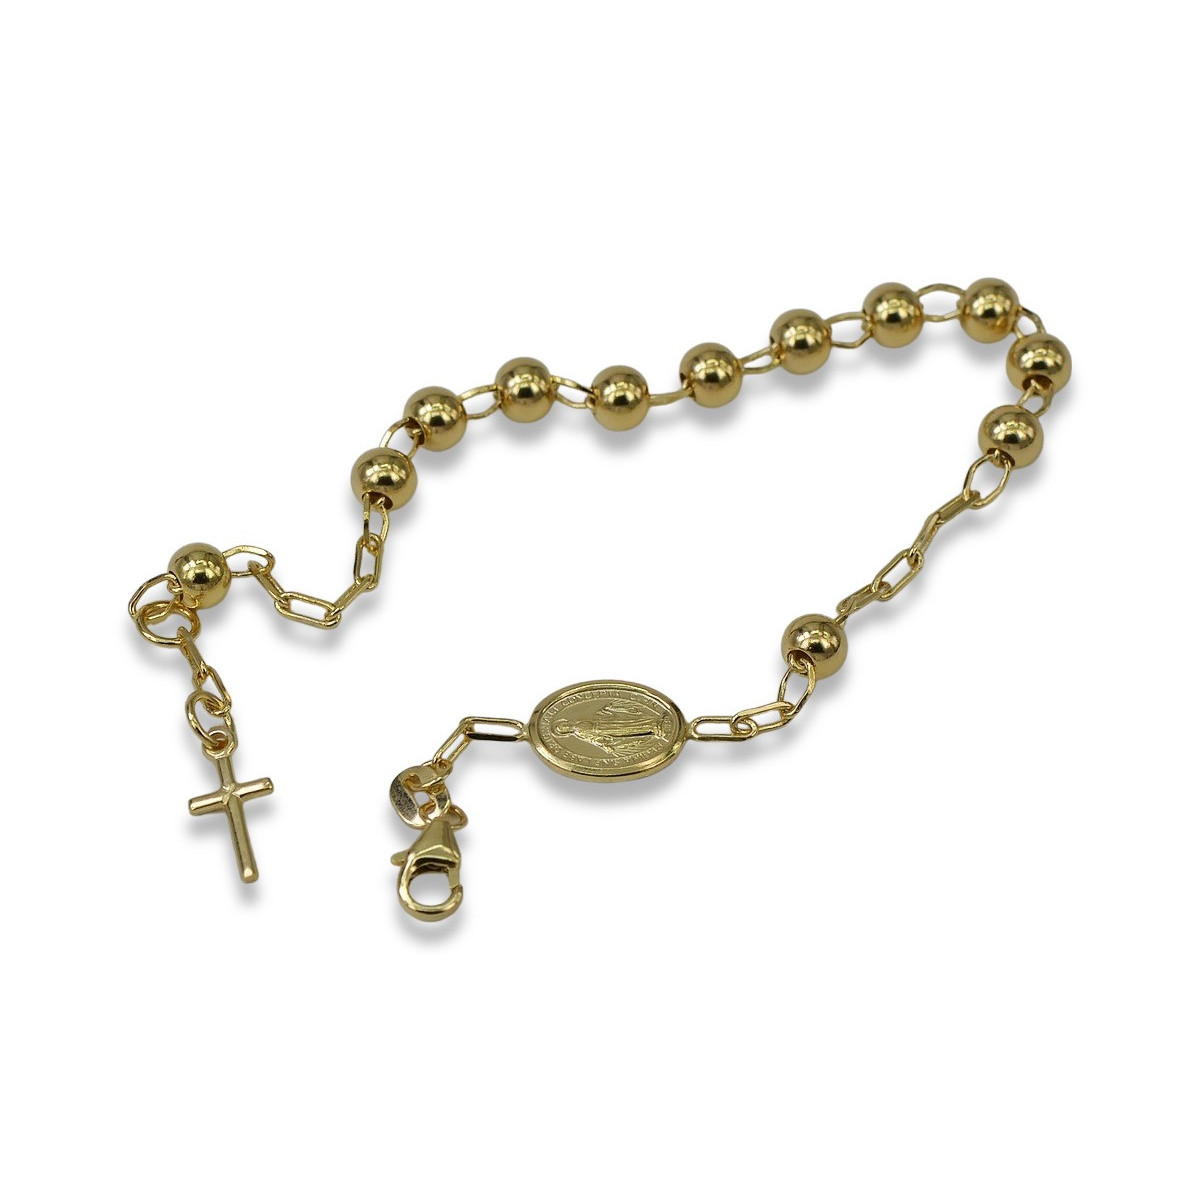 GOLD ROSARIES FROM THE VATICAN | MONDO CATTOLICO ROMA – Mondo Cattolico Roma